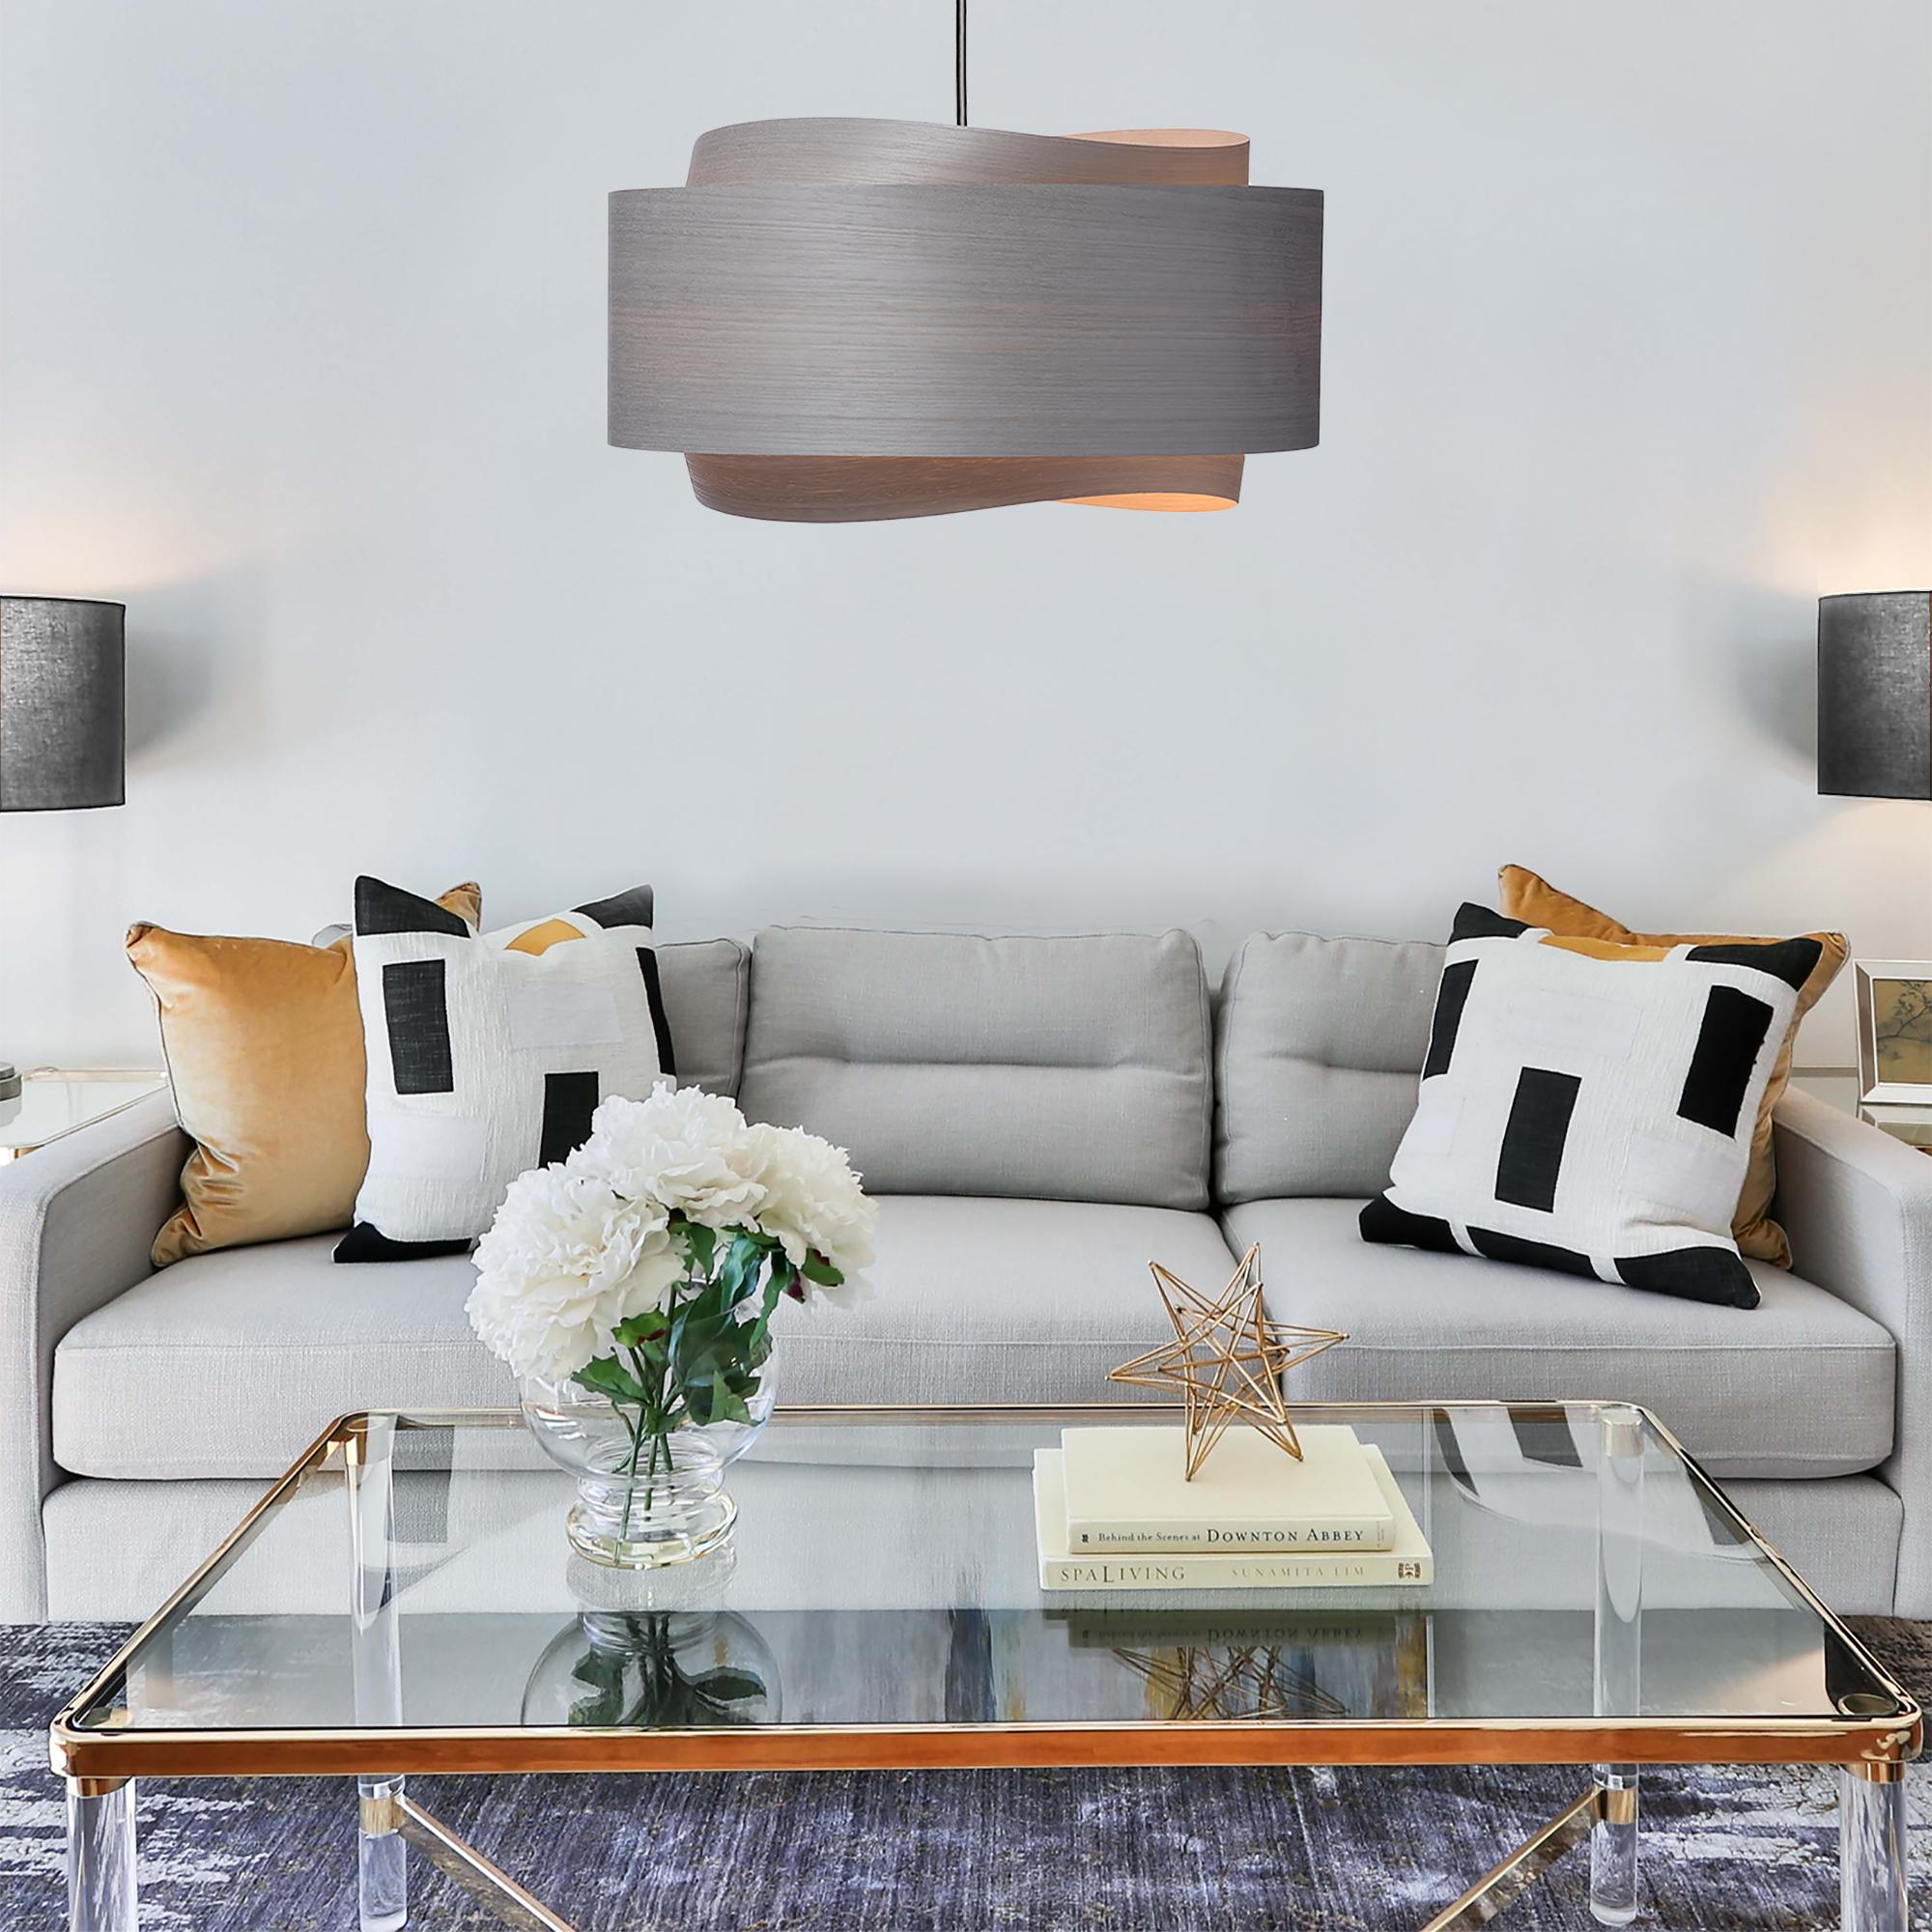 The BOWEN light fixture is a stunning example of contemporary Mid-Century Modern design. With its minimalist silhouette, beautifully translucent gray tones, and unique shape, this pendant light is sure to add a touch of sophistication to any